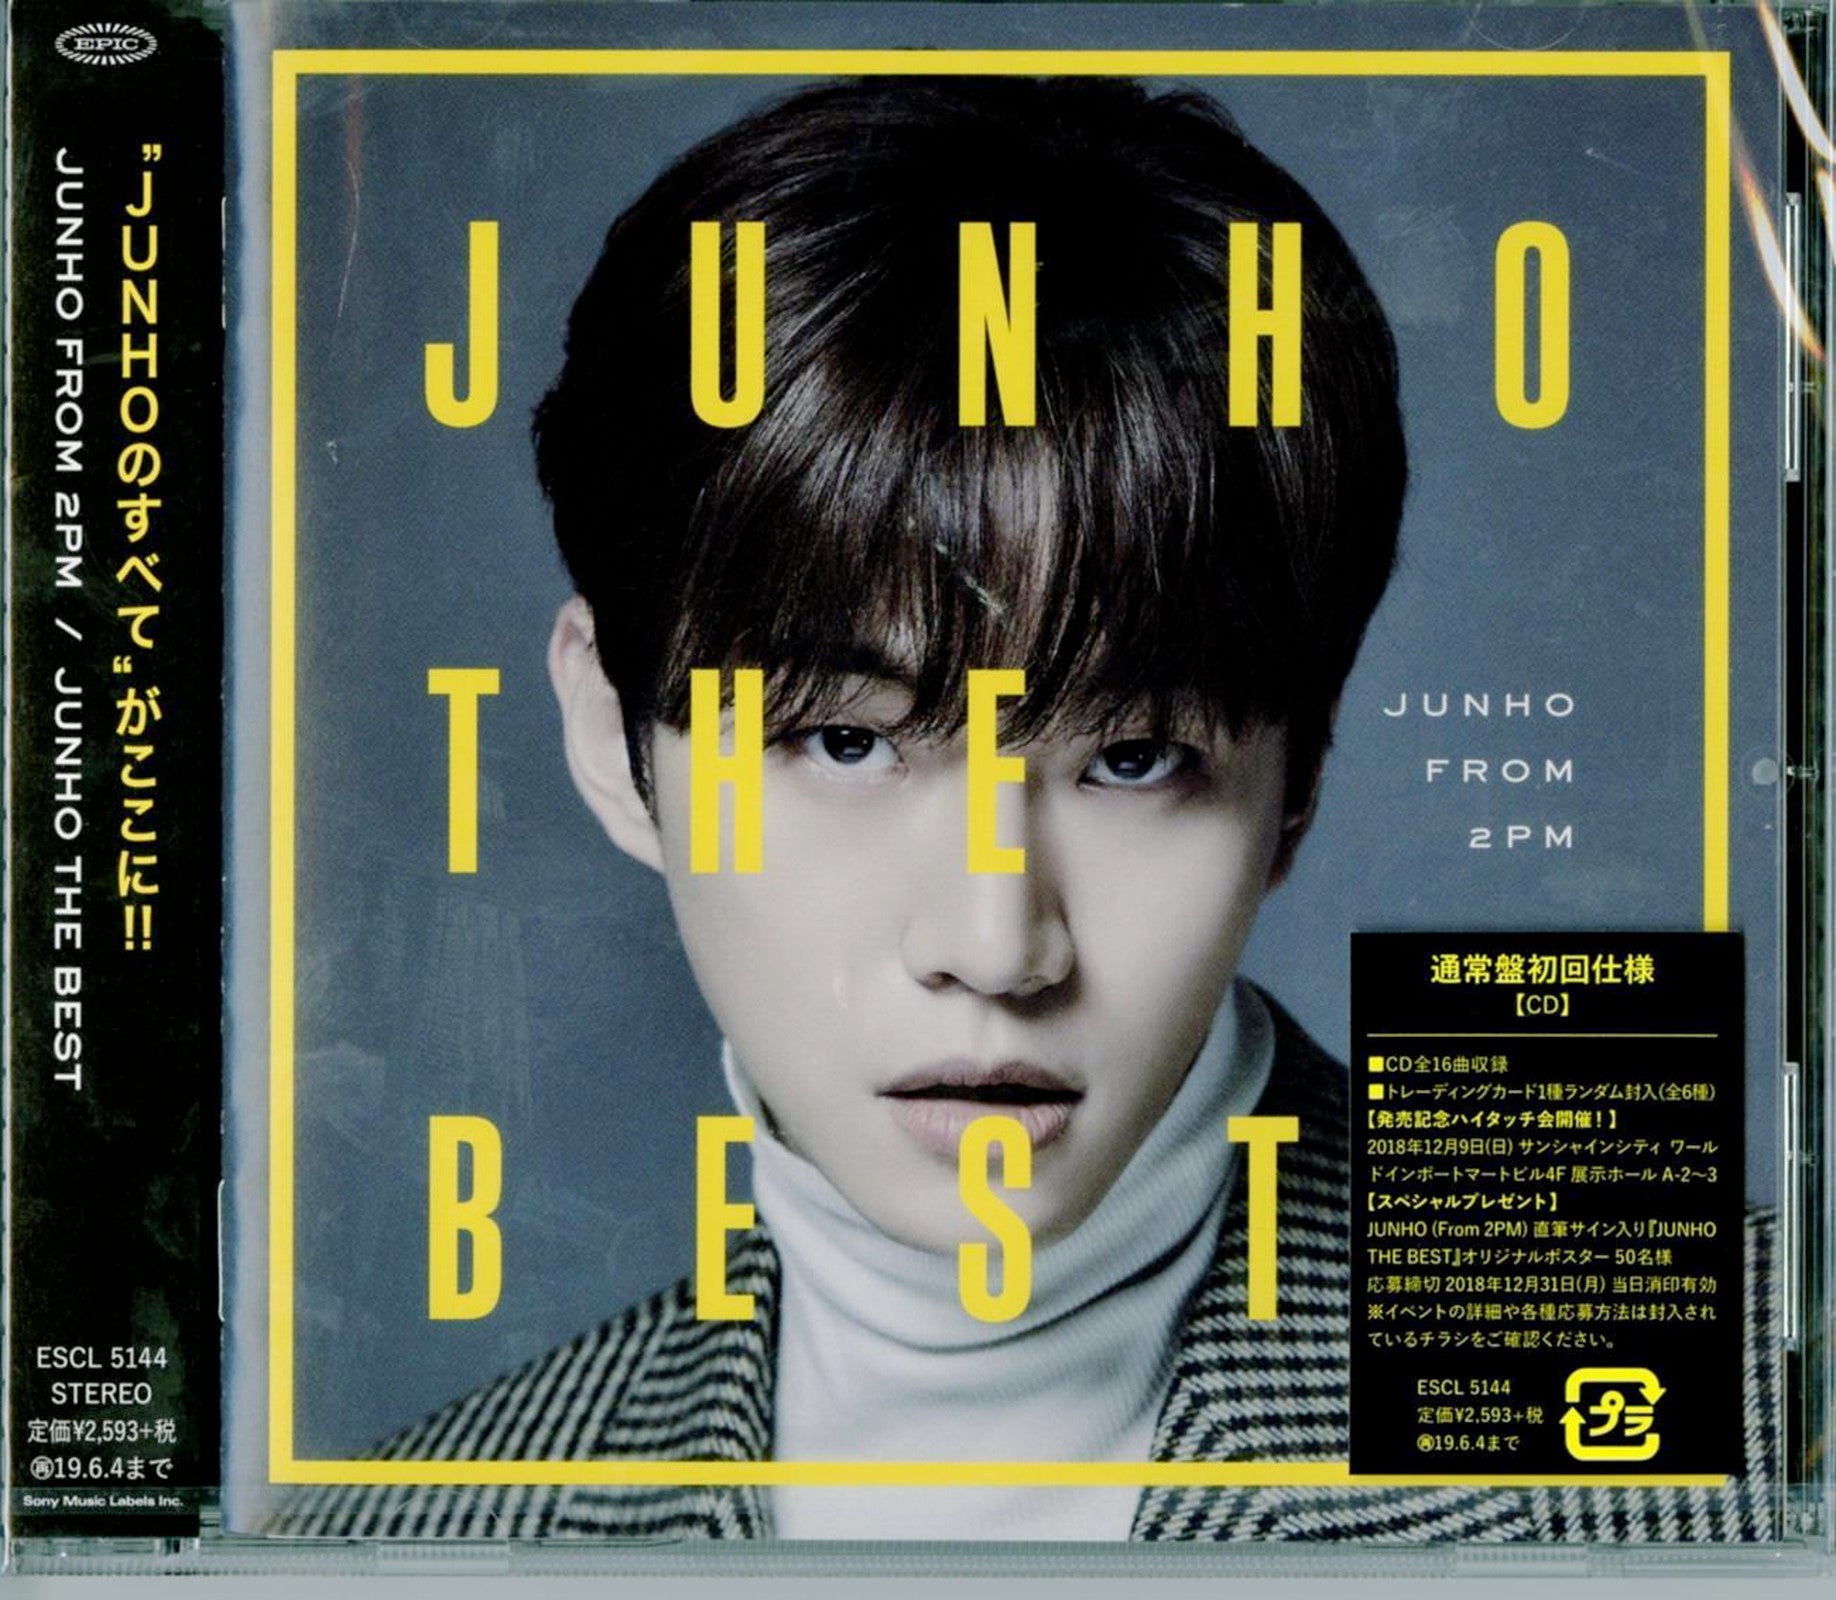 Junho (From 2Pm) - Junho The Best - Japan CD Limited Edition – CDs 